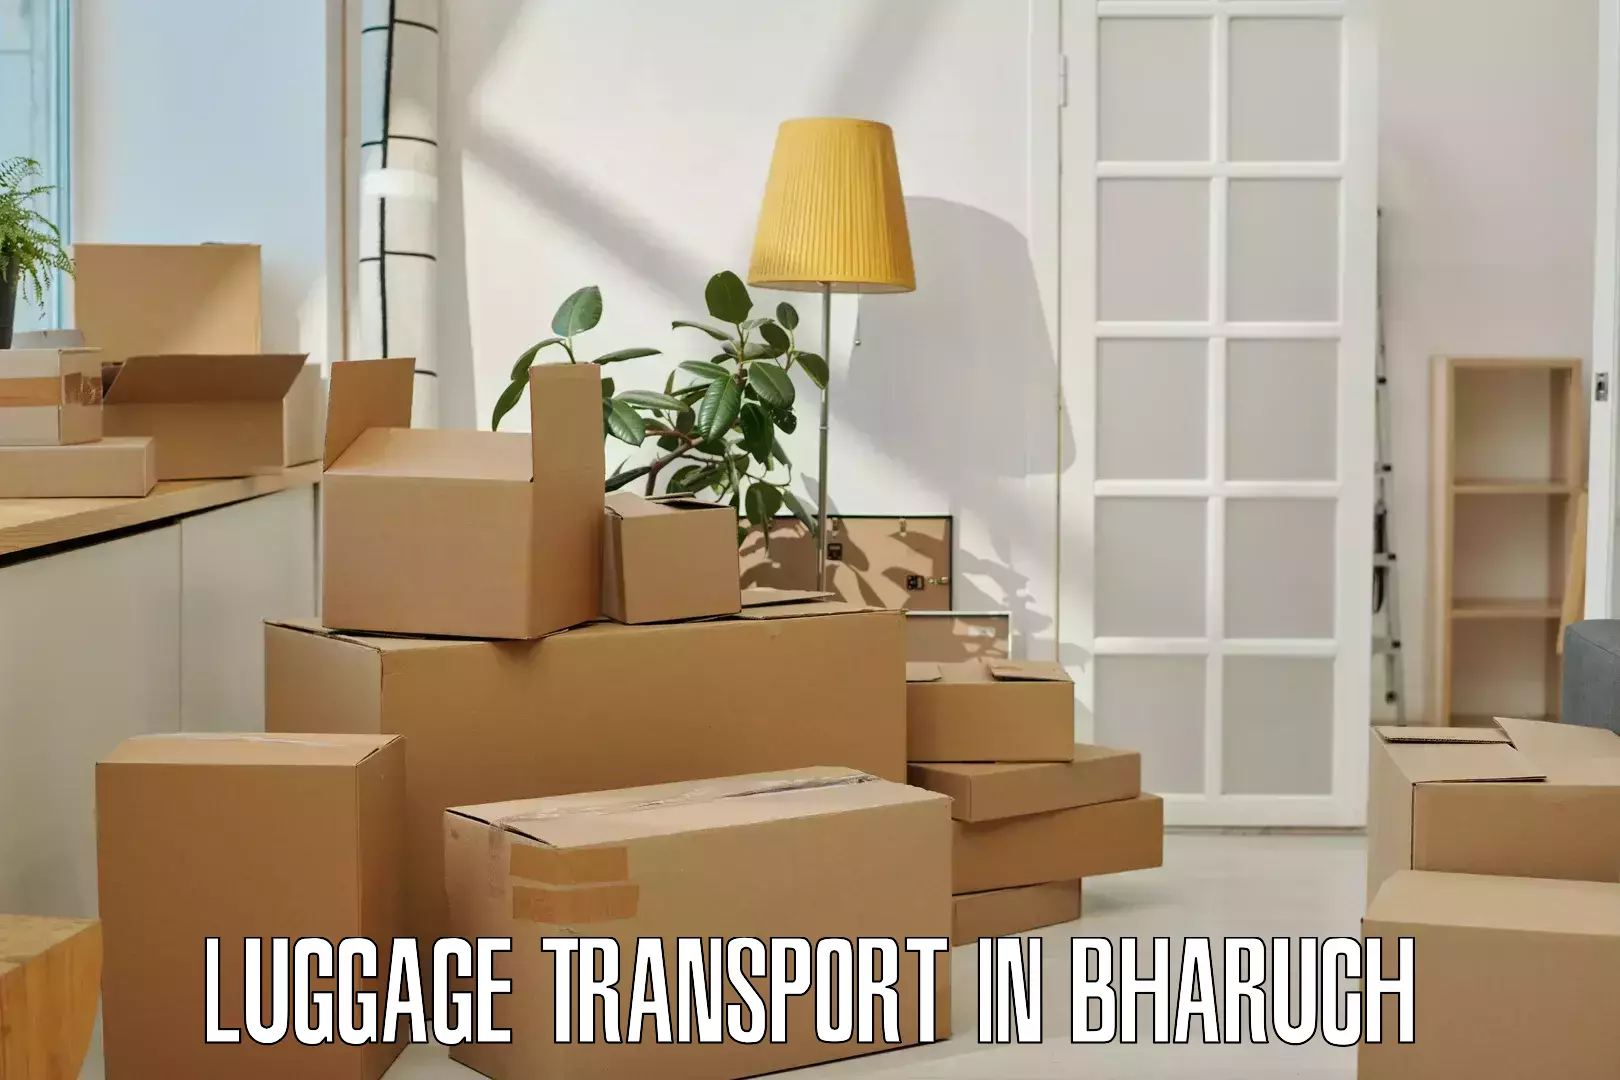 Student luggage transport in Bharuch